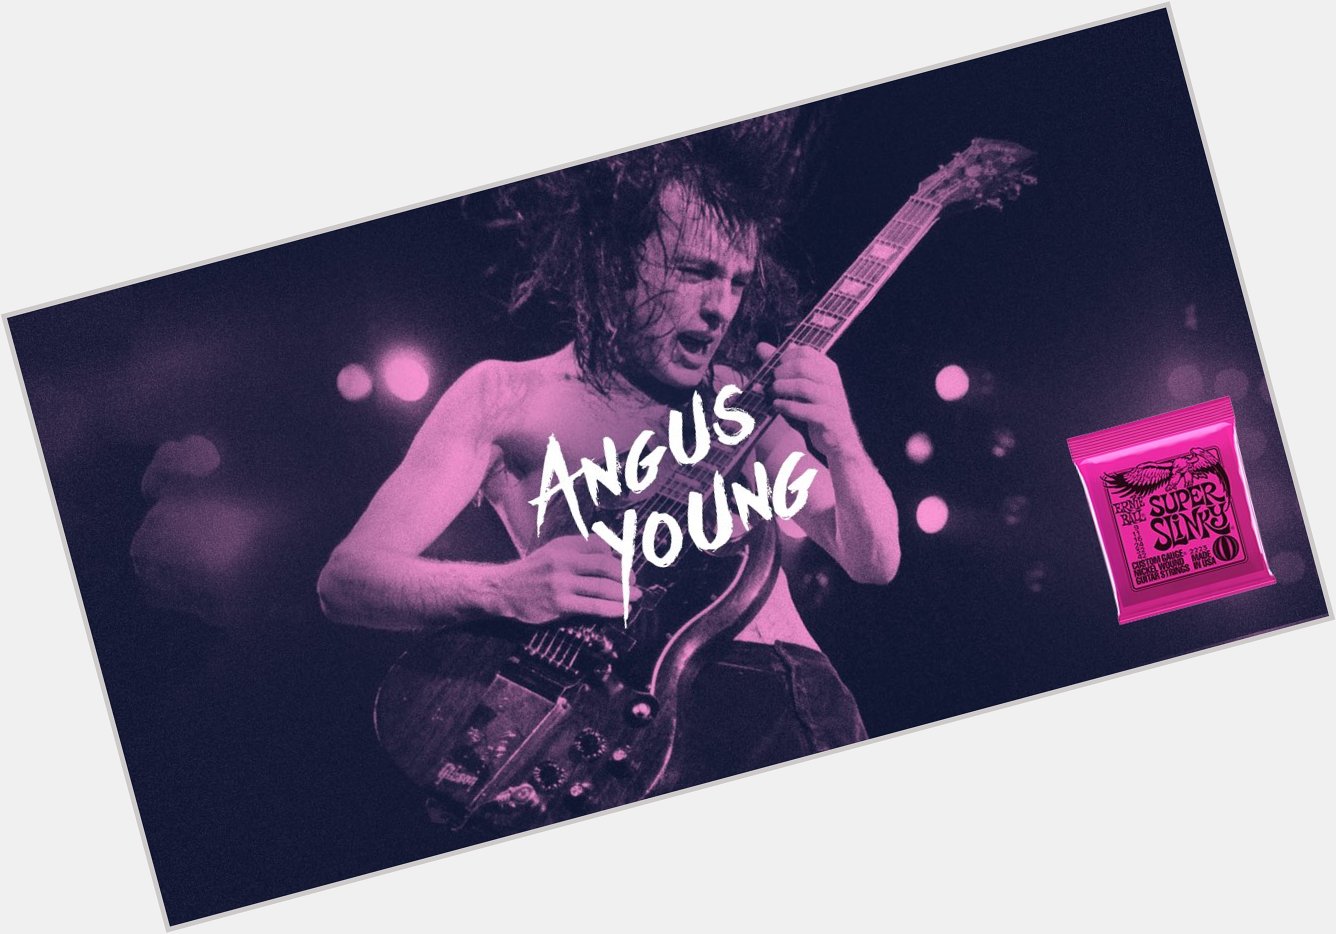 We\re proud to have Angus Young as a longtime member of the Ernie Ball family. Happy birthday, Angus. 